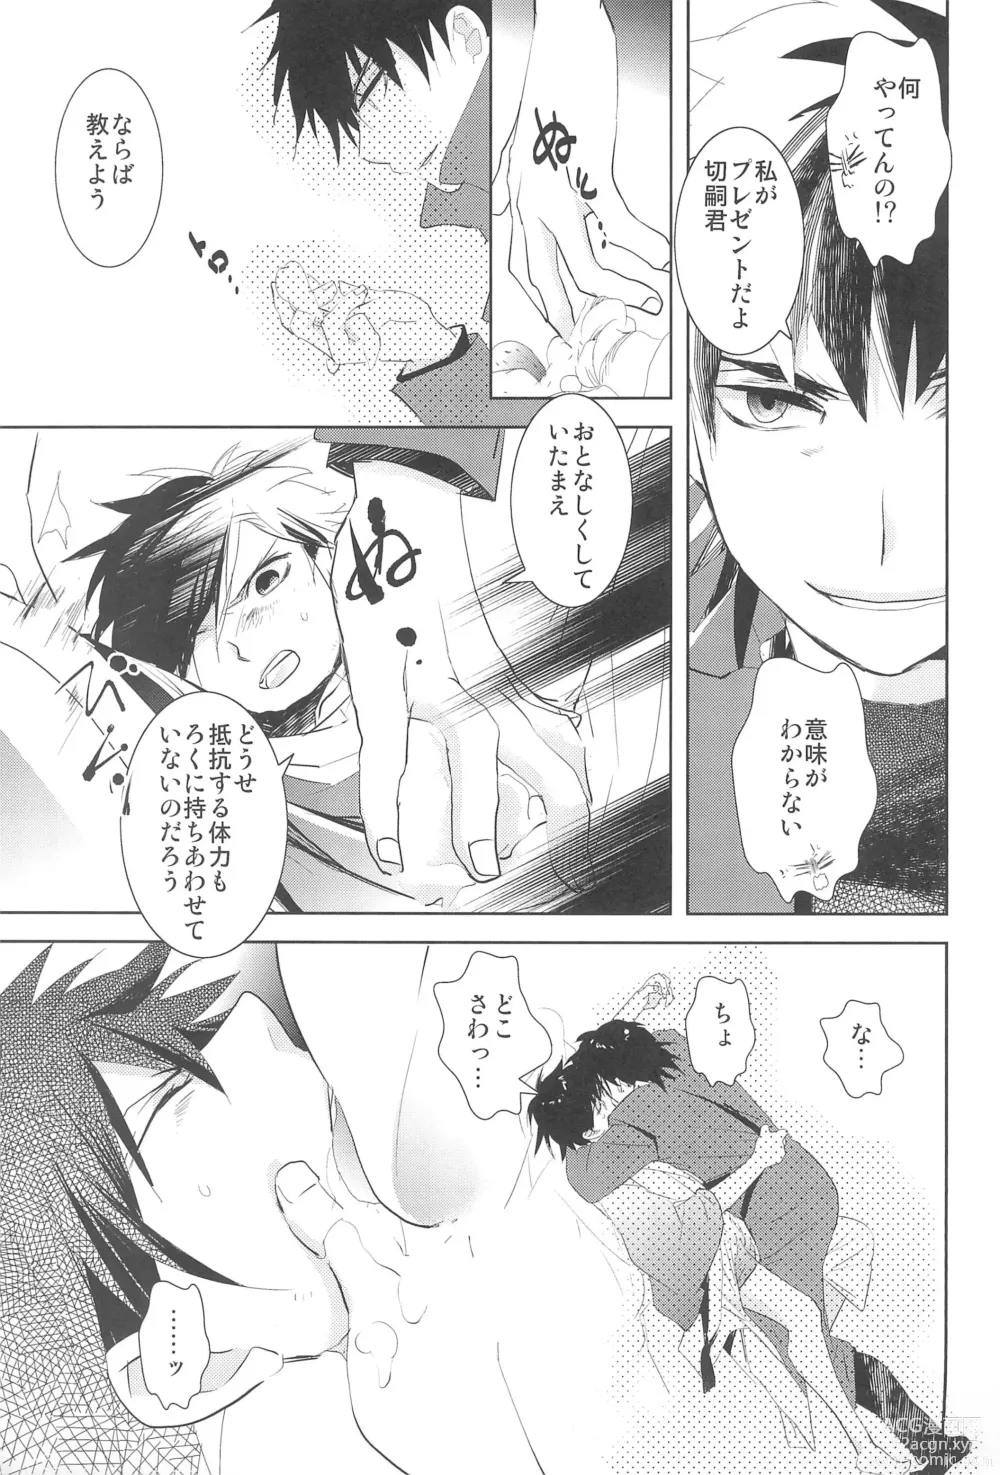 Page 8 of doujinshi Strawberry on the birthdaycakes